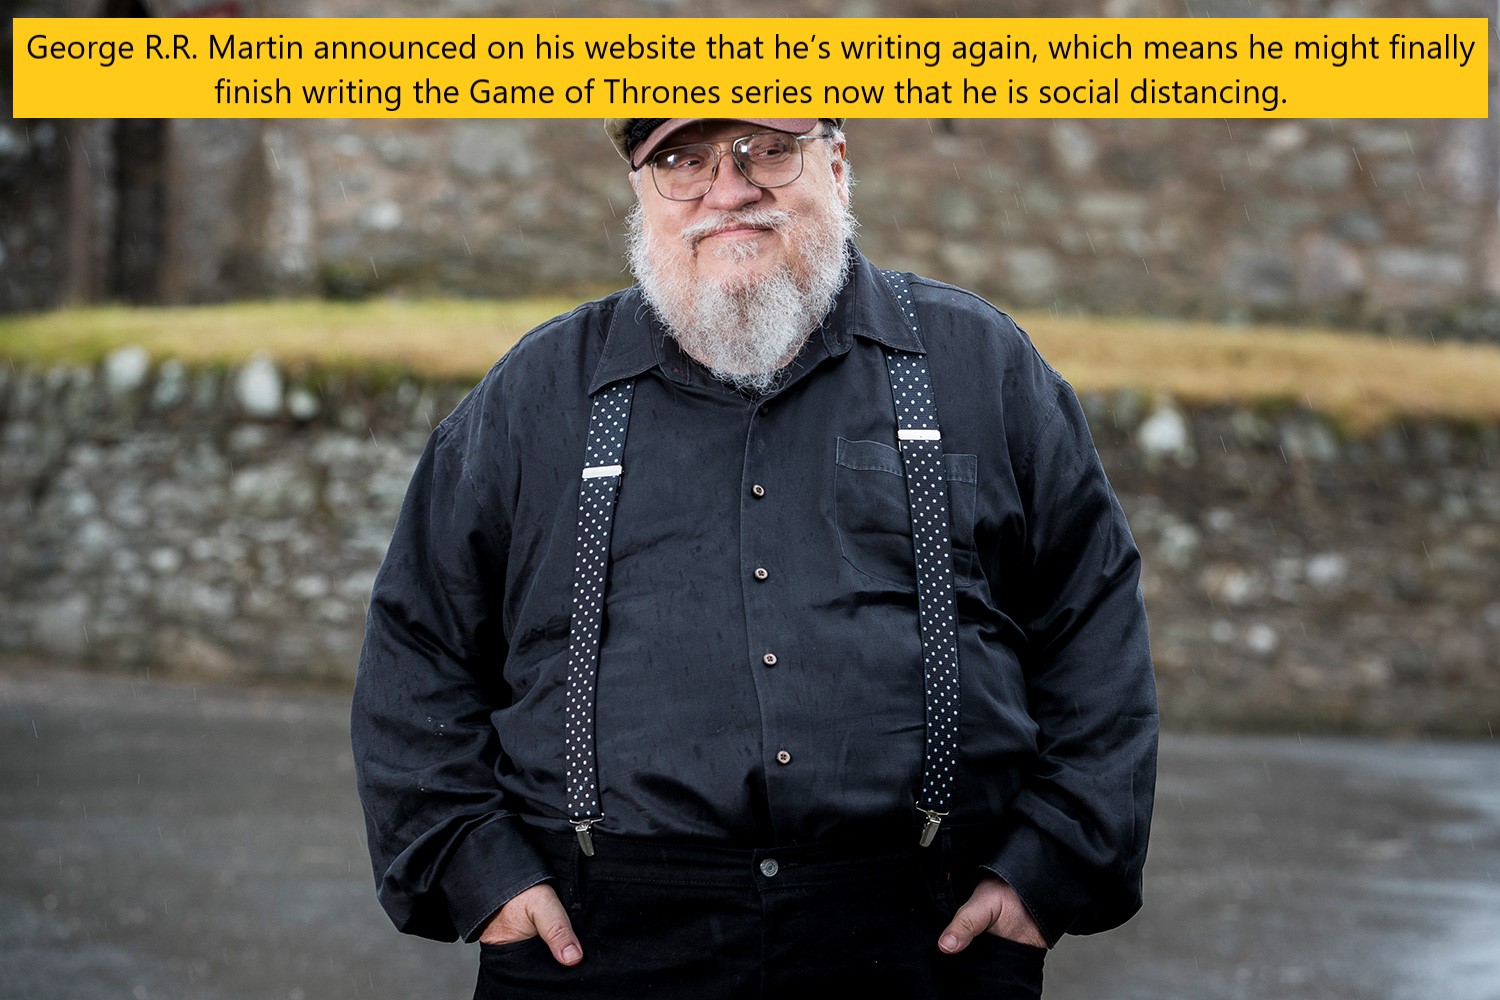 george rr martin - George R.R. Martin announced on his website that he's writing again, which means he might finally finish writing the Game of Thrones series now that he is social distancing.